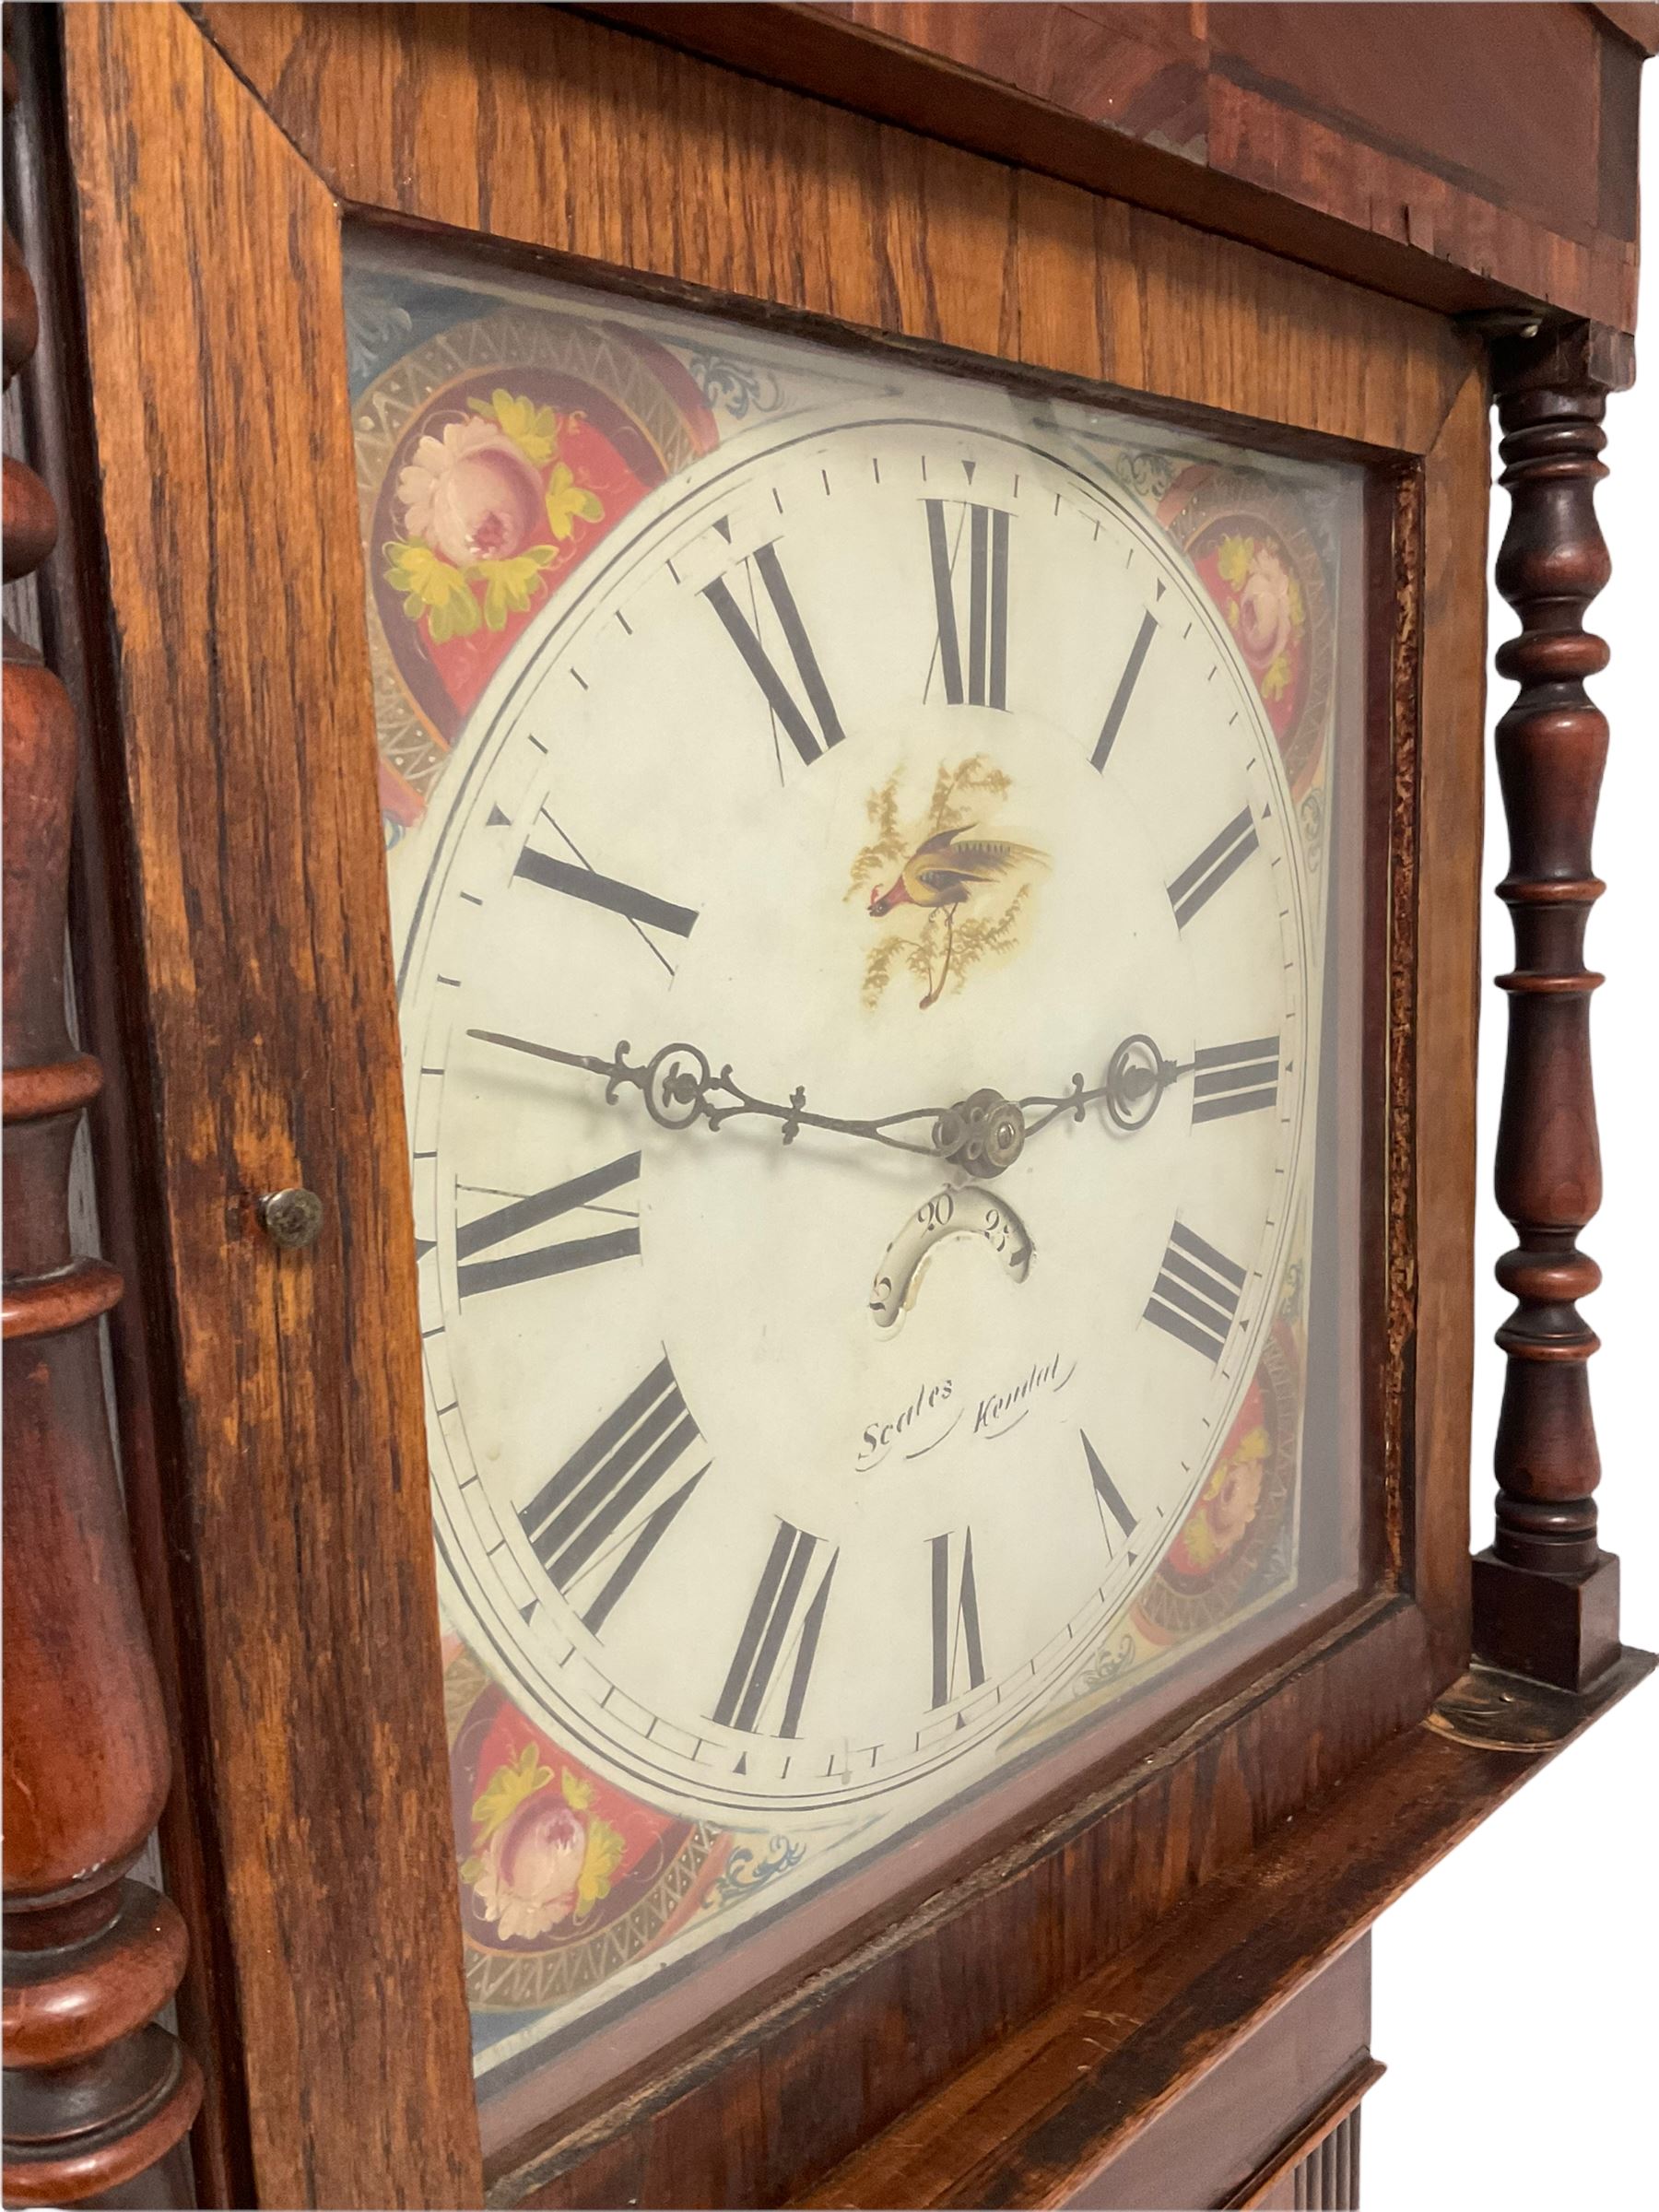 A mid-19th century oak cased longcase clock with a swan's neck pediment and wooden paterae - Image 2 of 4